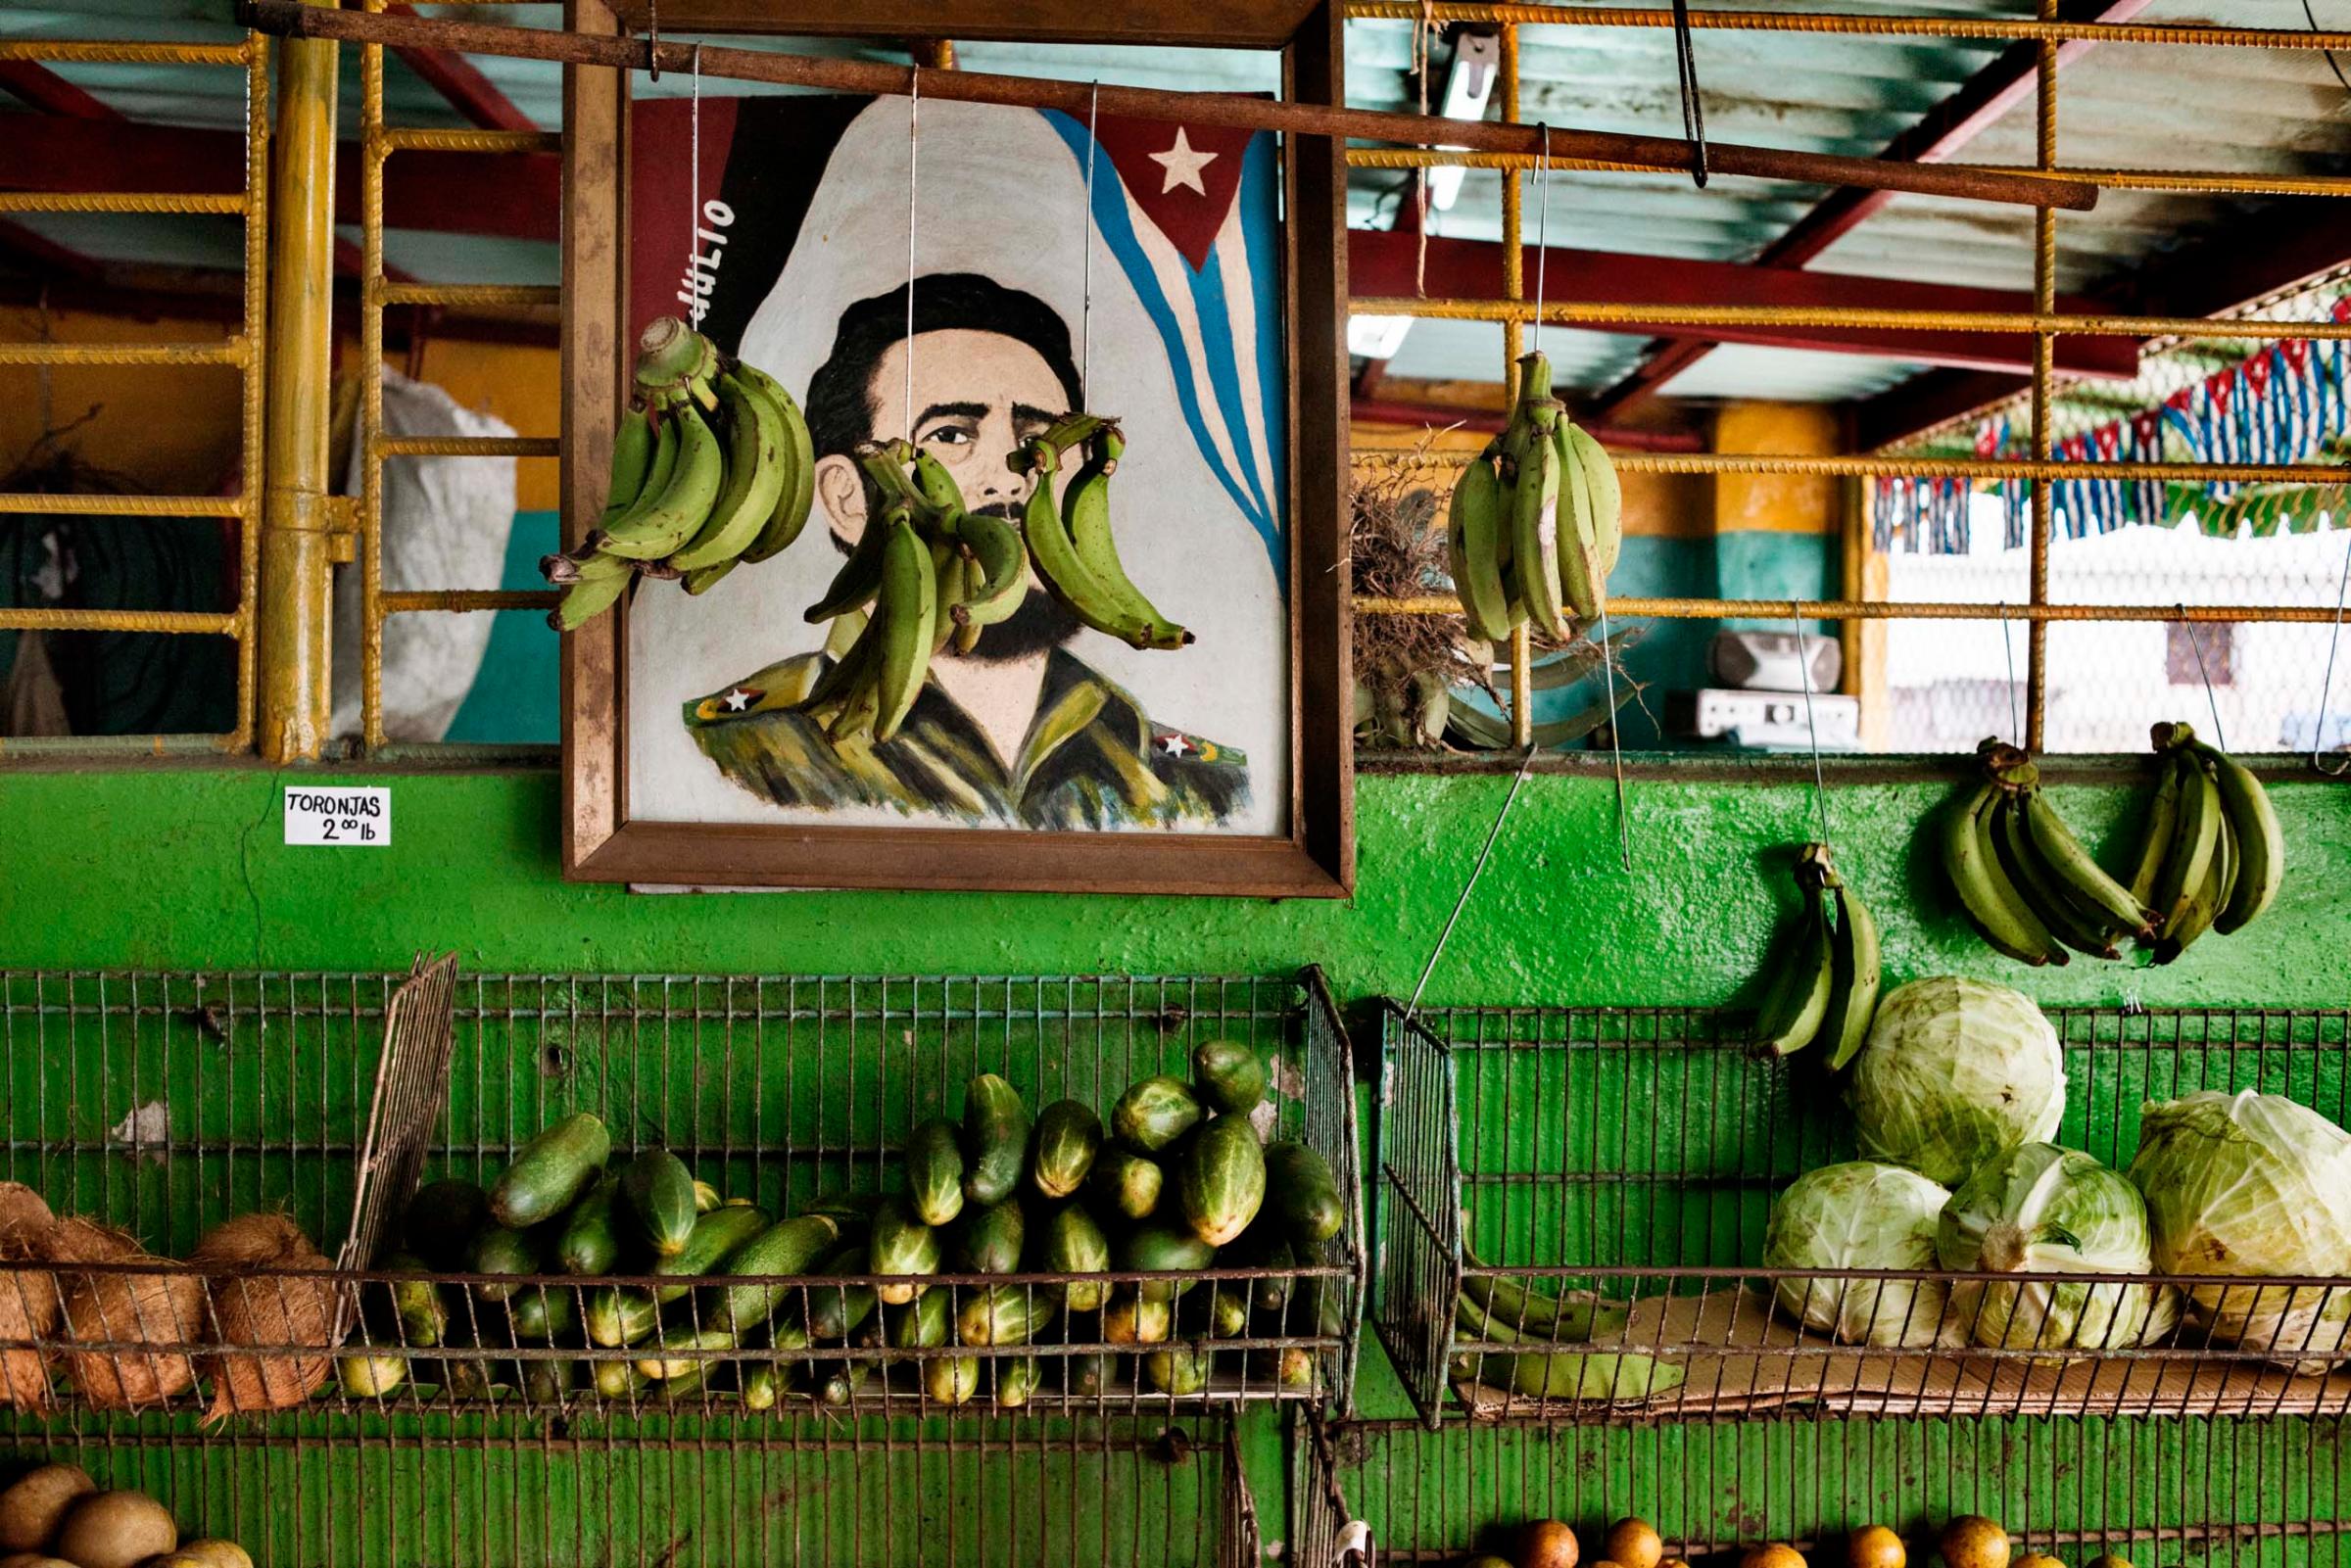 December 2014. In a state run market, a portrait of Fidel Castro is seen among fruit and vegetables. Because of limited food supply, Cubans depend on monthly rations for basic staples like rice and beans.